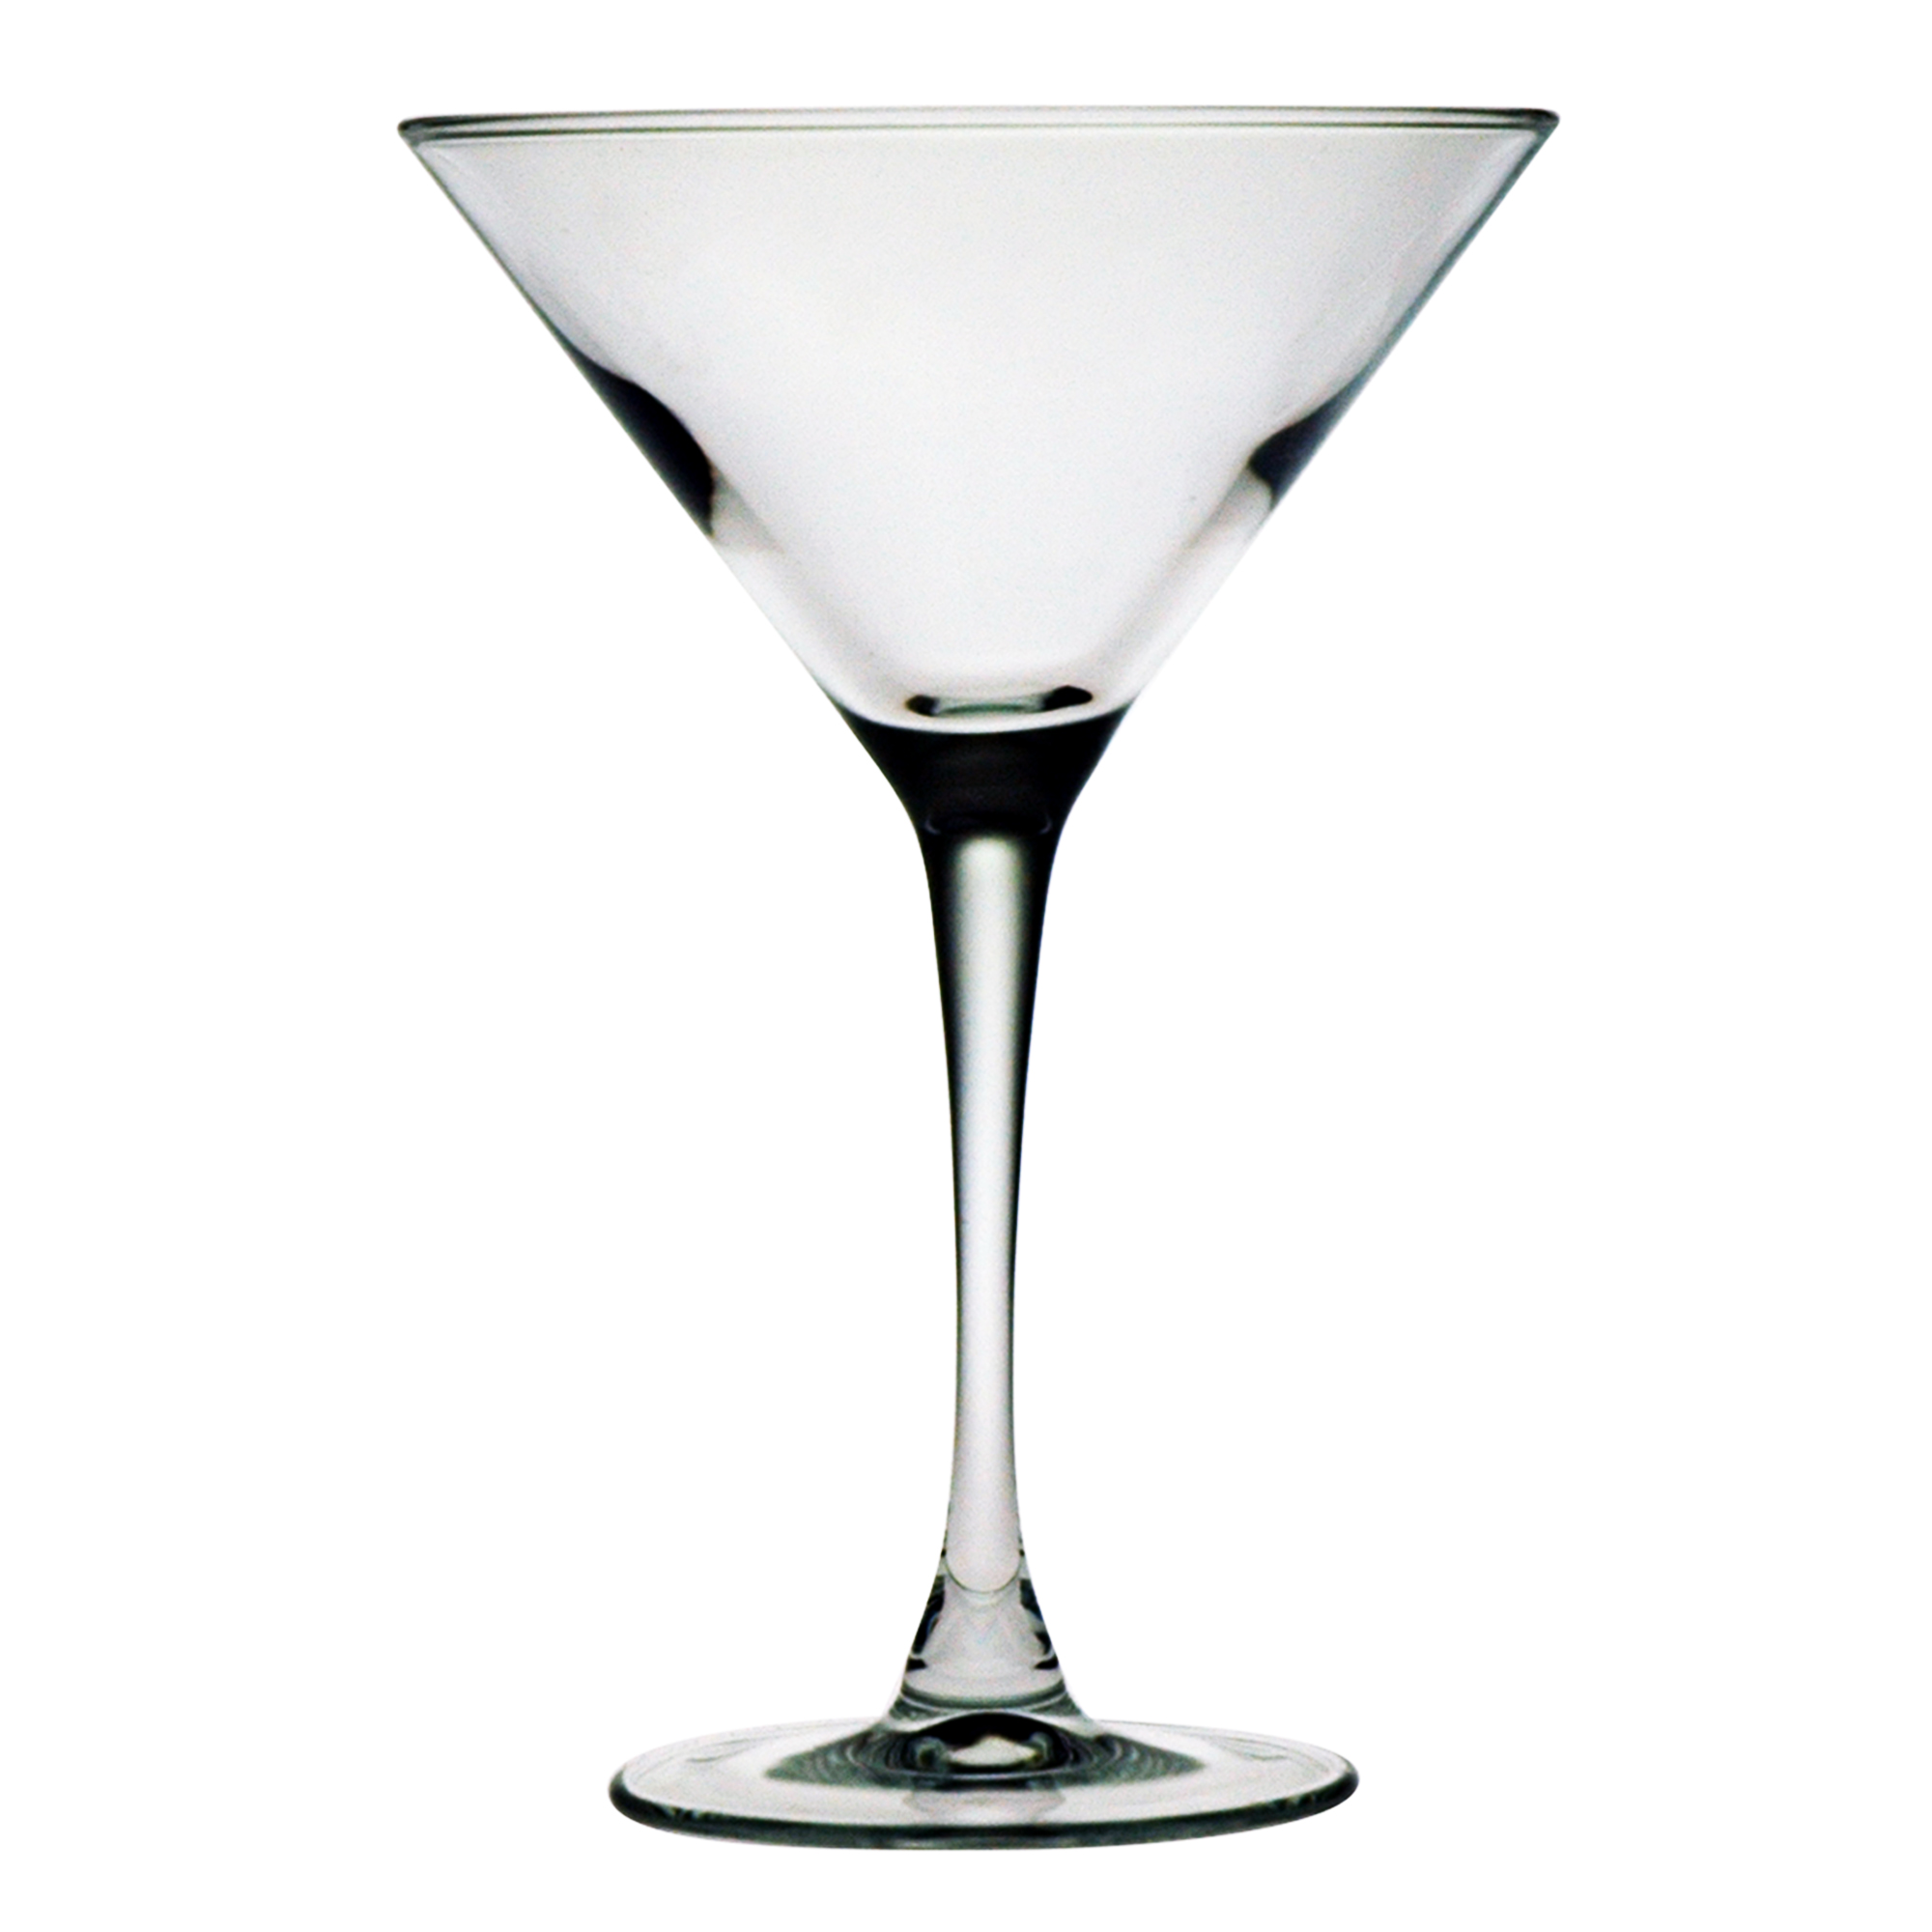 free clipart images martini glass - photo #35